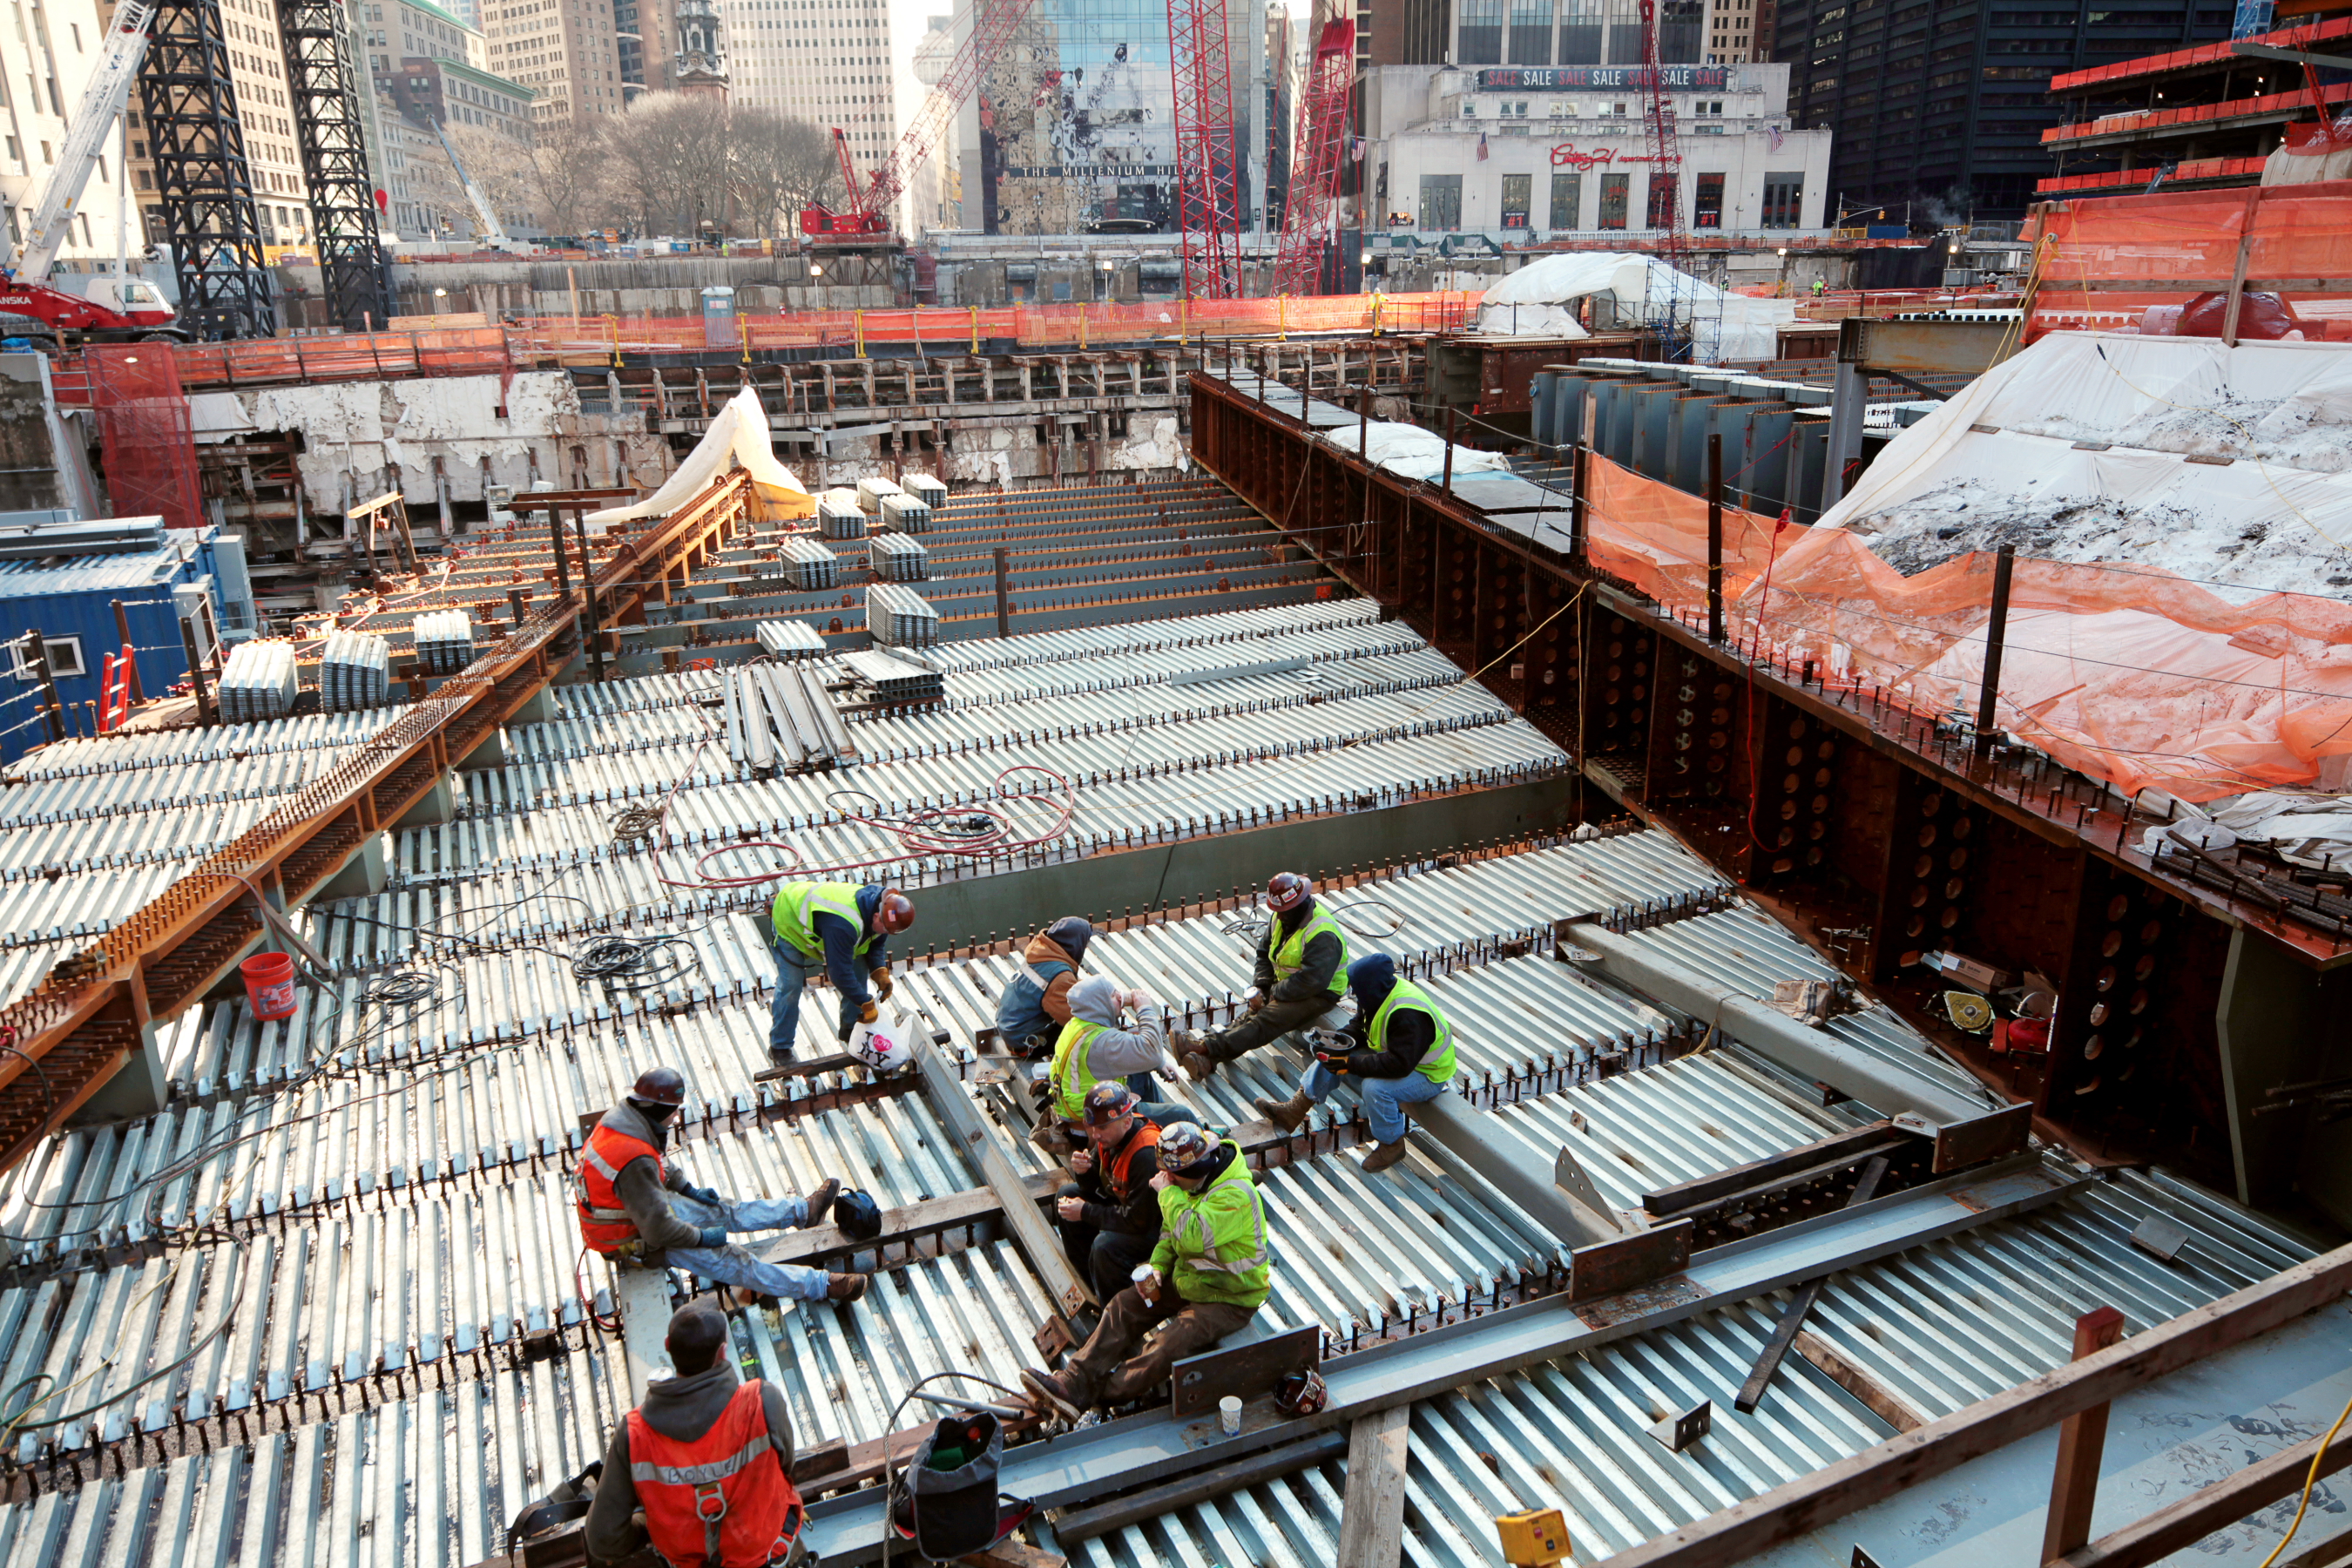 A group of construction workers work on the 9/11 Memorial in February 2011. Construction materials surround them as they work on a steel platform.